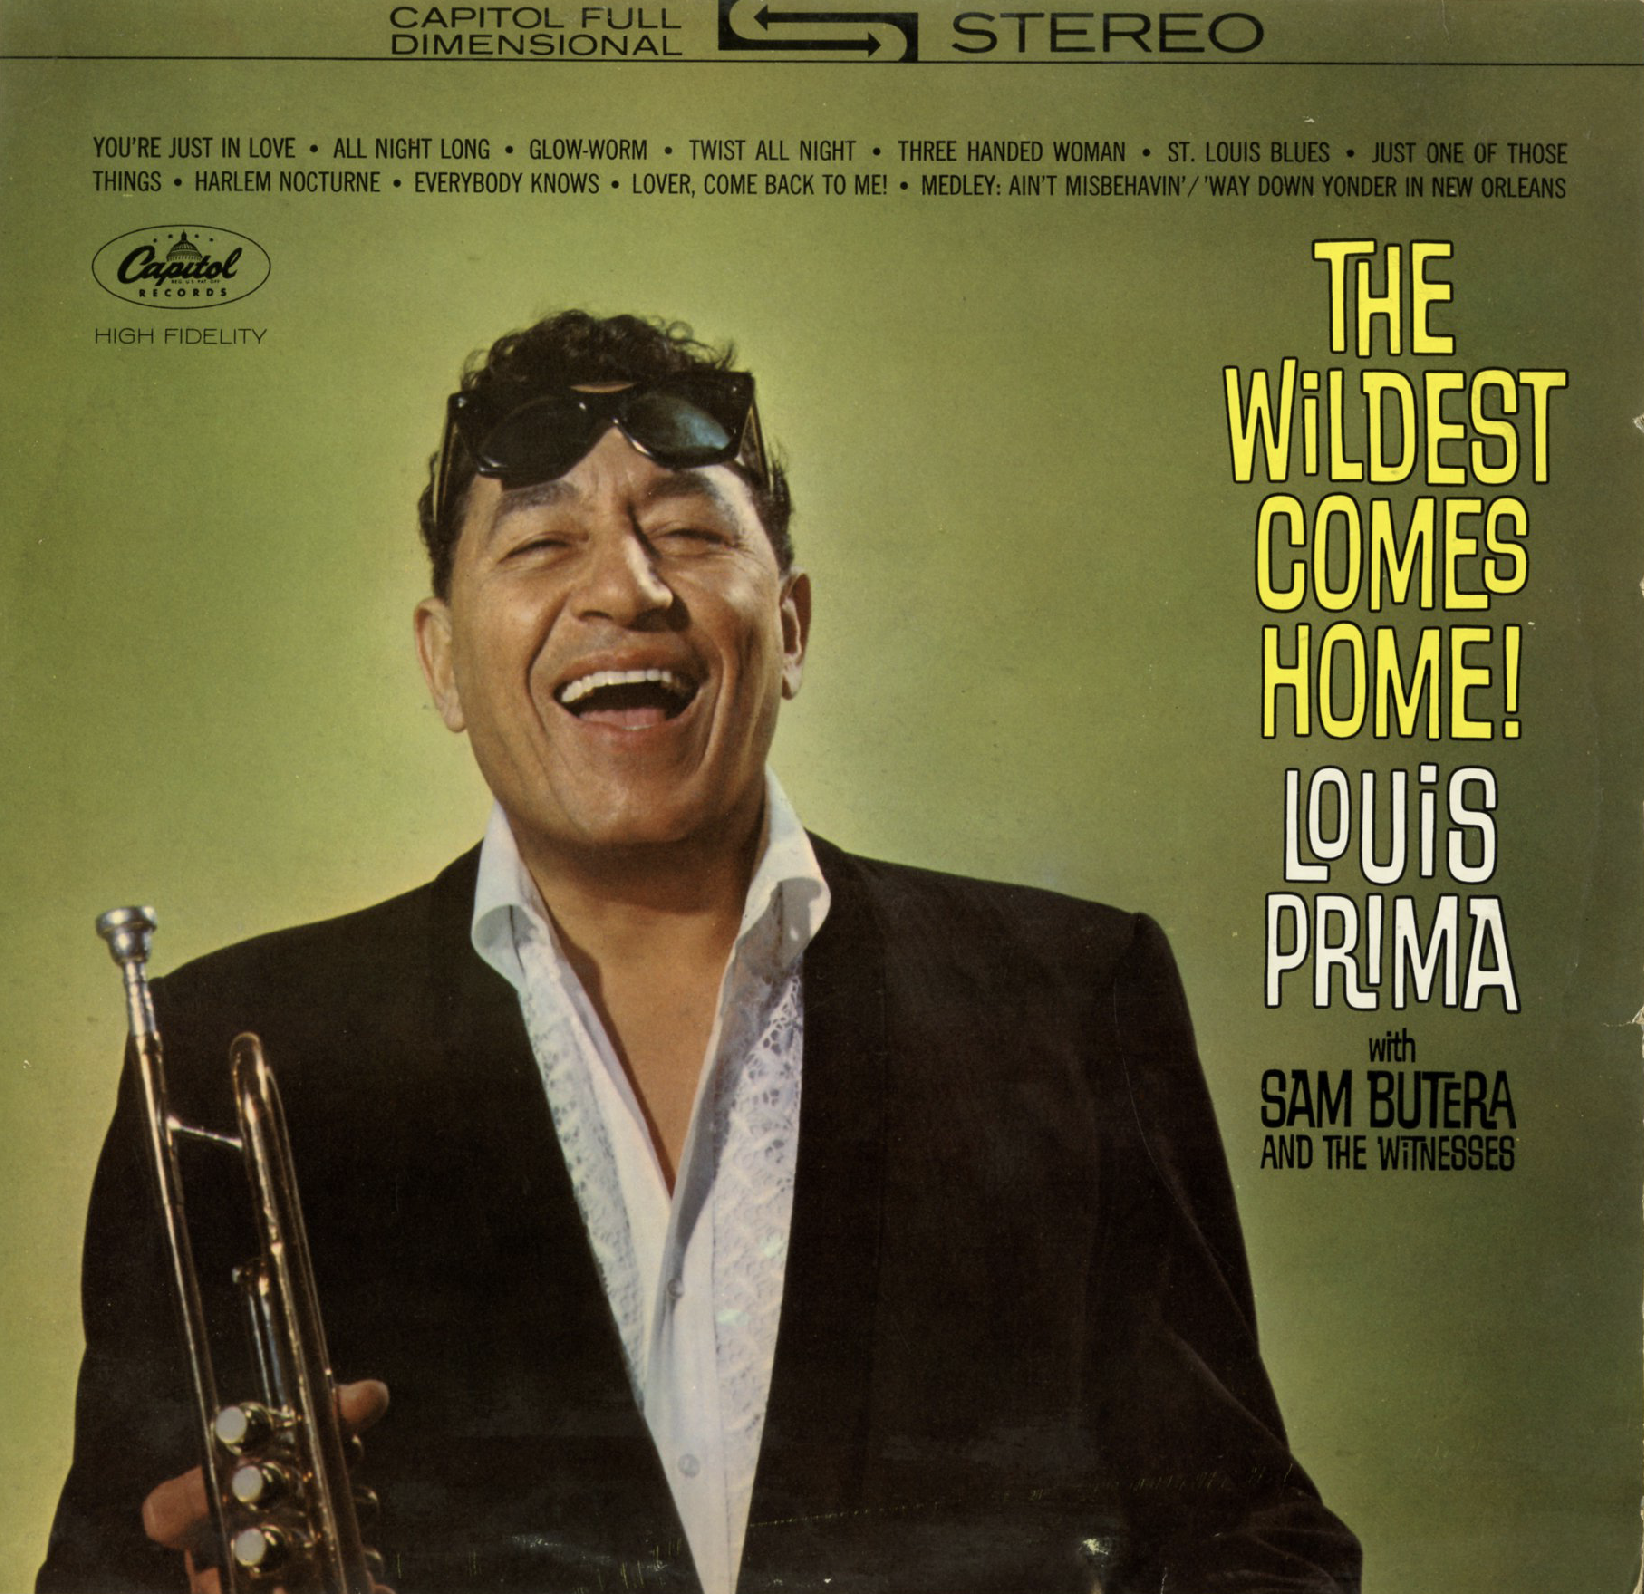 Unearthed In The Atomic Attic: The Wildest Comes Home! - Louis Prima